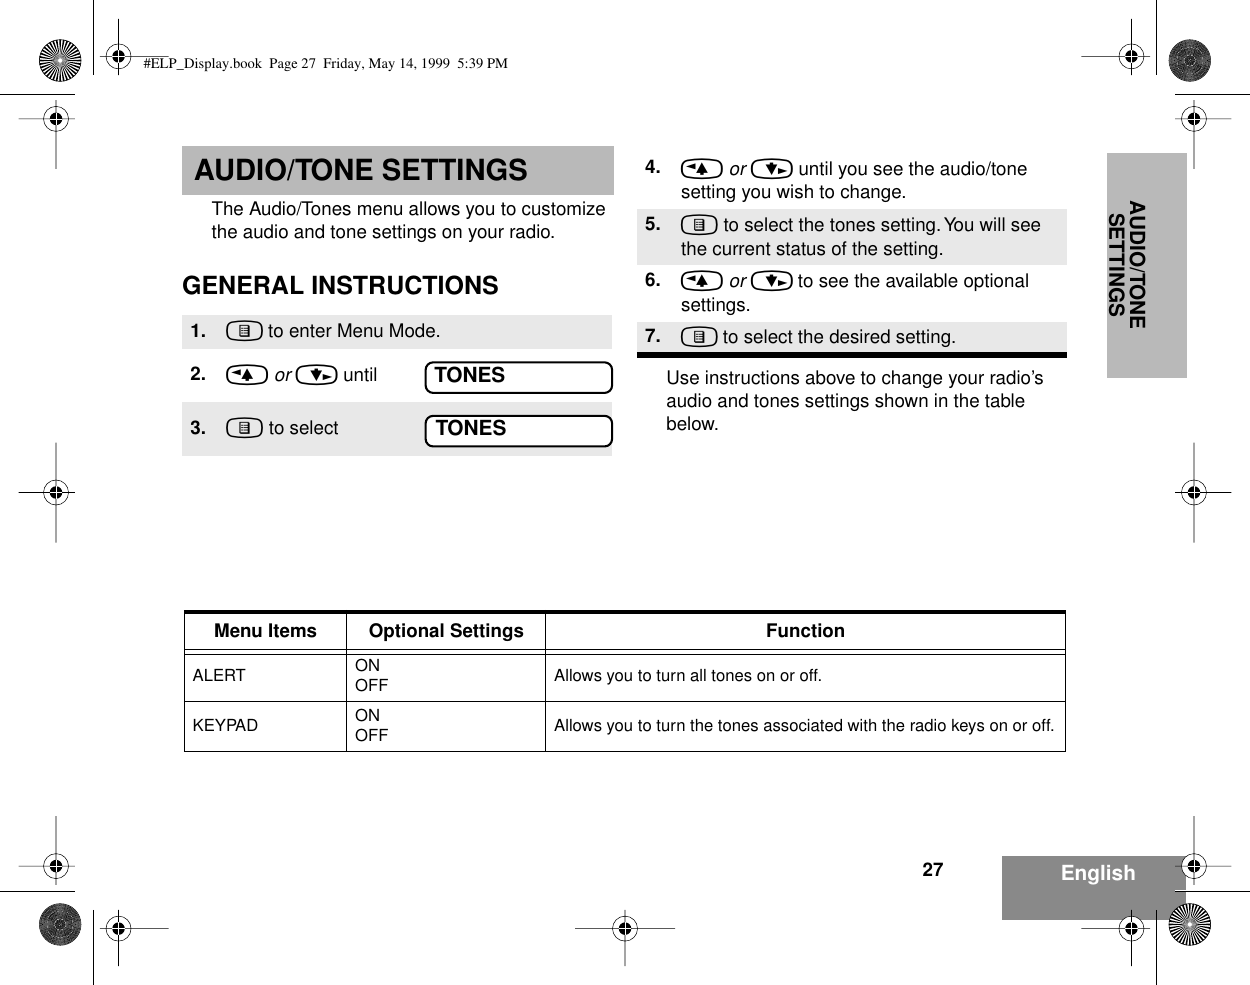 AUDIO/TONE SETTINGS27 EnglishAUDIO/TONE SETTINGSThe Audio/Tones menu allows you to customize the audio and tone settings on your radio.GENERAL INSTRUCTIONSUse instructions above to change your radio’s audio and tones settings shown in the table below.1. ) to enter Menu Mode.2. &lt; or &gt; until3. ) to selectTONESTONES4. &lt; or &gt; until you see the audio/tone setting you wish to change.5. ) to select the tones setting. You will see the current status of the setting.6. &lt; or &gt; to see the available optional settings.7. ) to select the desired setting.Menu Items Optional Settings FunctionALERT ONOFF Allows you to turn all tones on or off.KEYPAD ONOFF Allows you to turn the tones associated with the radio keys on or off.#ELP_Display.book  Page 27  Friday, May 14, 1999  5:39 PM